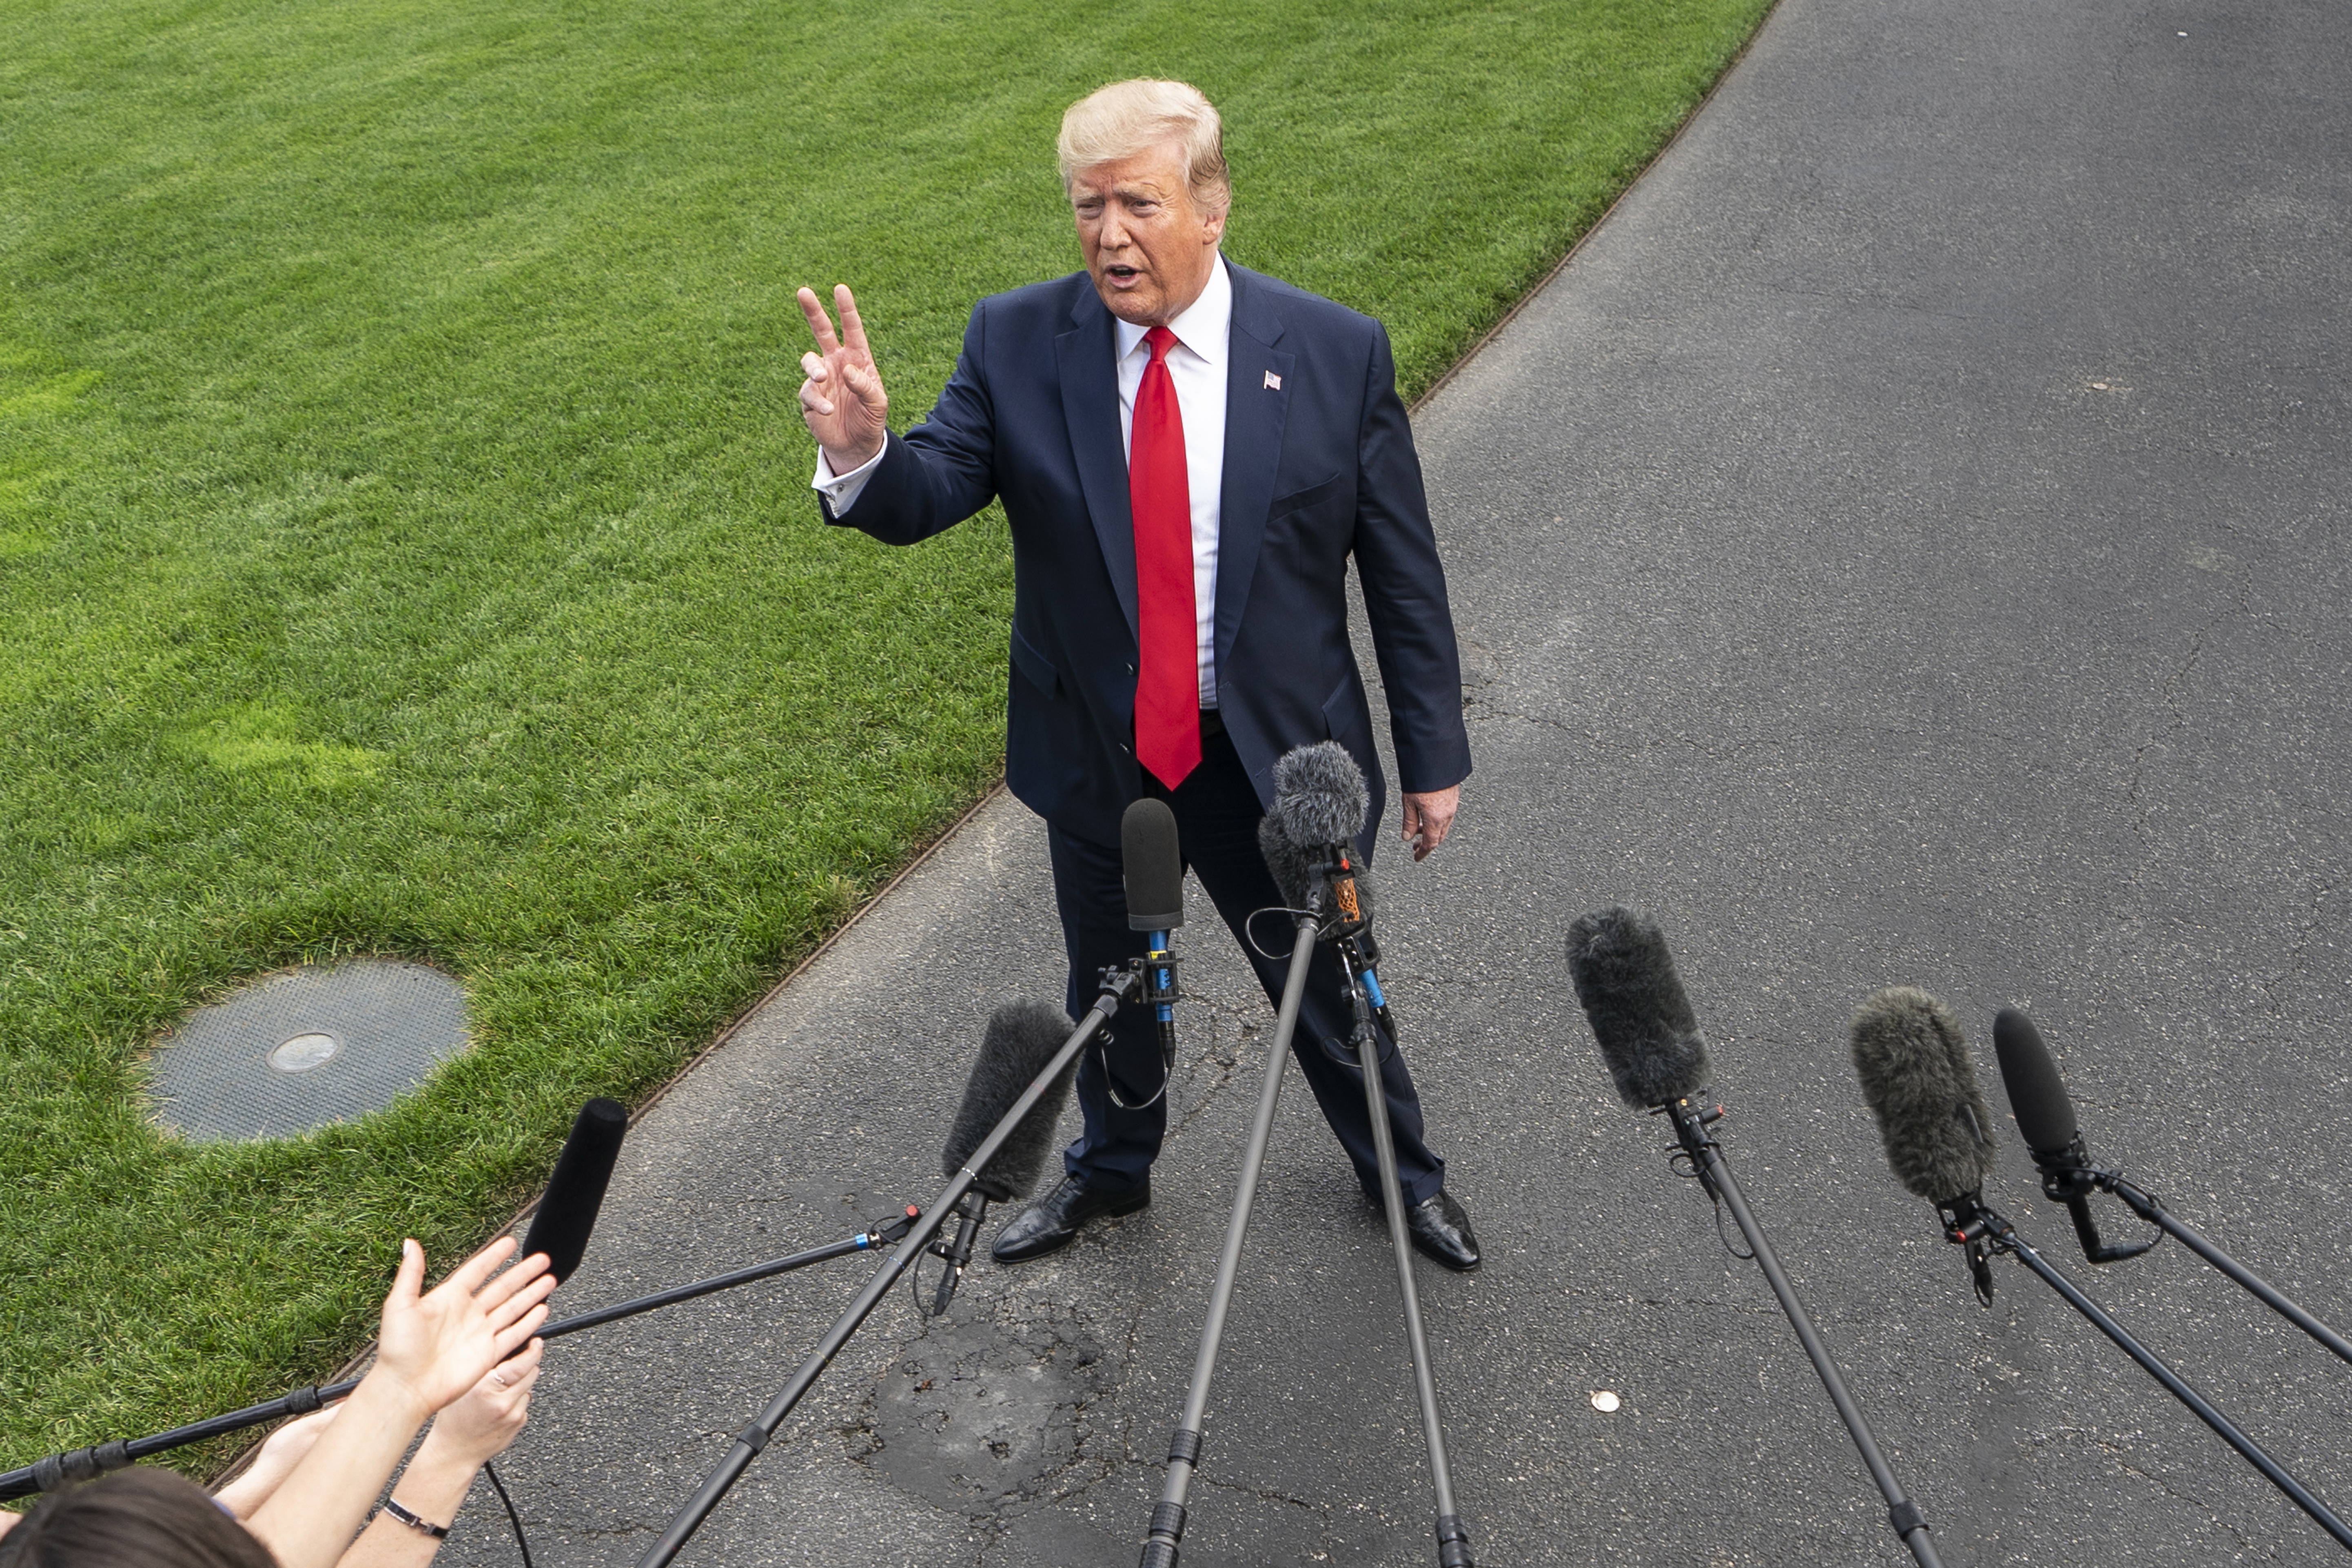 epa07656731 US President Donald J. Trump speaks to the media as he departs the White House for a campaign event in Florida in Washington, DC, USA, 18 June 2019. President Trump is travelling to Orlando to launch his 2020 re-election campaign. Prior to leaving the White House, the President spoke about Patrick Shanahan, who withdrew from consideration to be Trump's permanent defense secretary. He also spoke about tariffs, immigration, and growing tensions with Iran.  EPA/JIM LO SCALZO ALTERNATIVE CROP